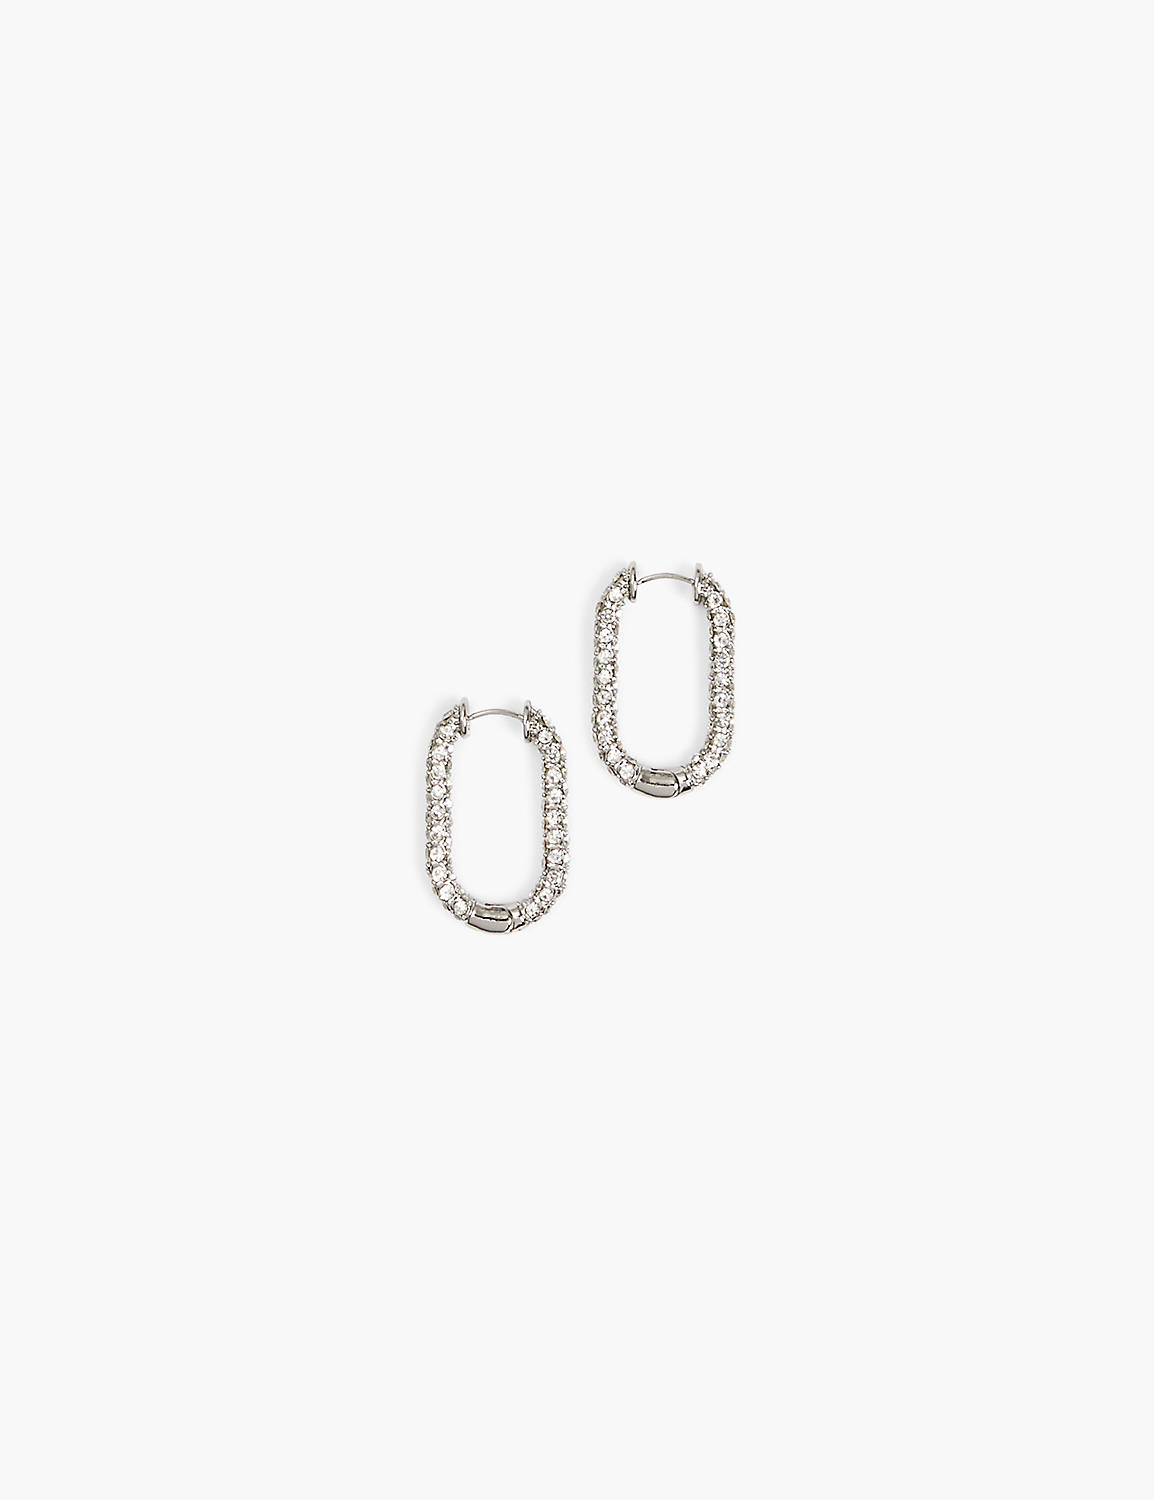 Pave Oblong Hoop Earring Product Image 1